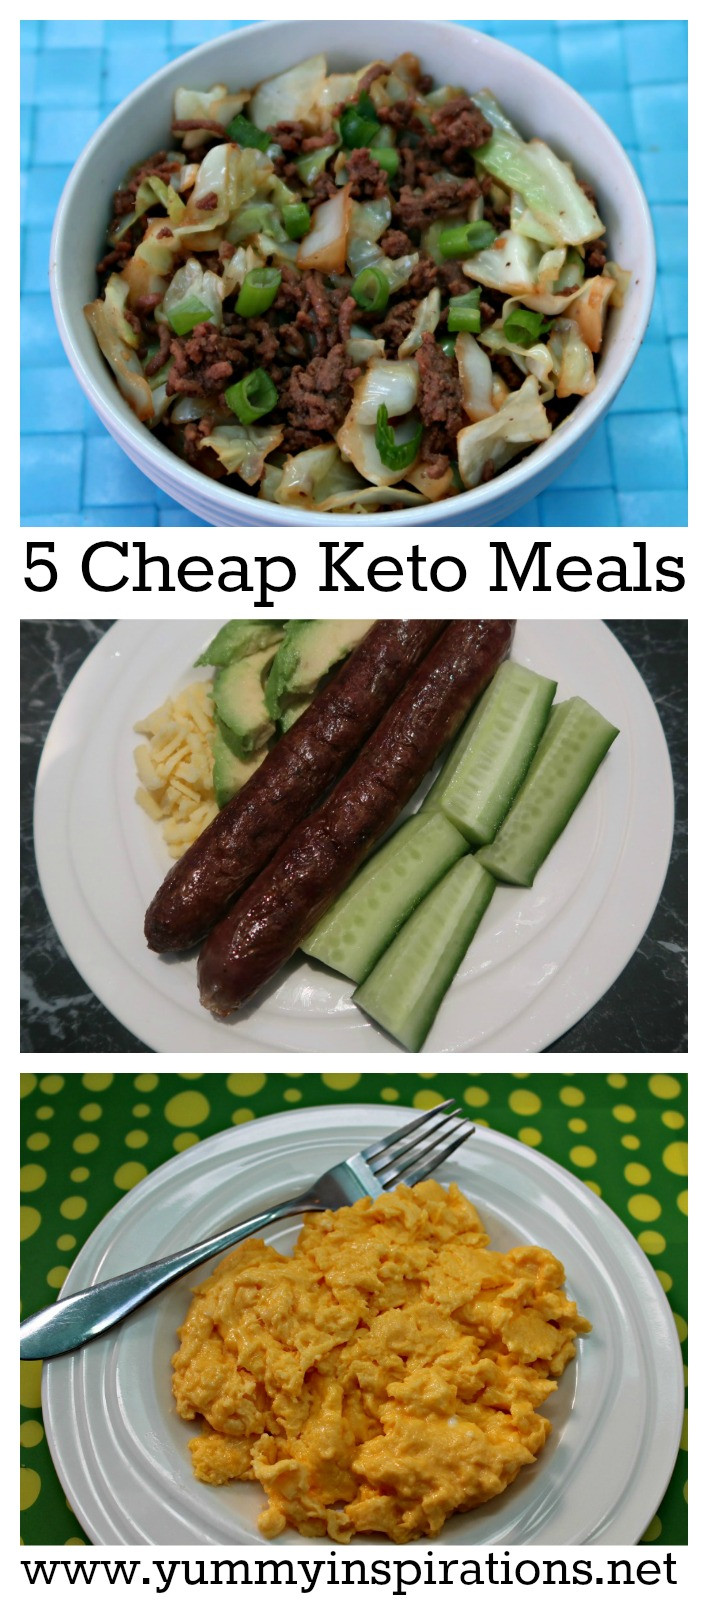 Keto Diet Recipes On A Budget
 5 Cheap Keto Meals Low Carb Keto Diet Foods A Bud